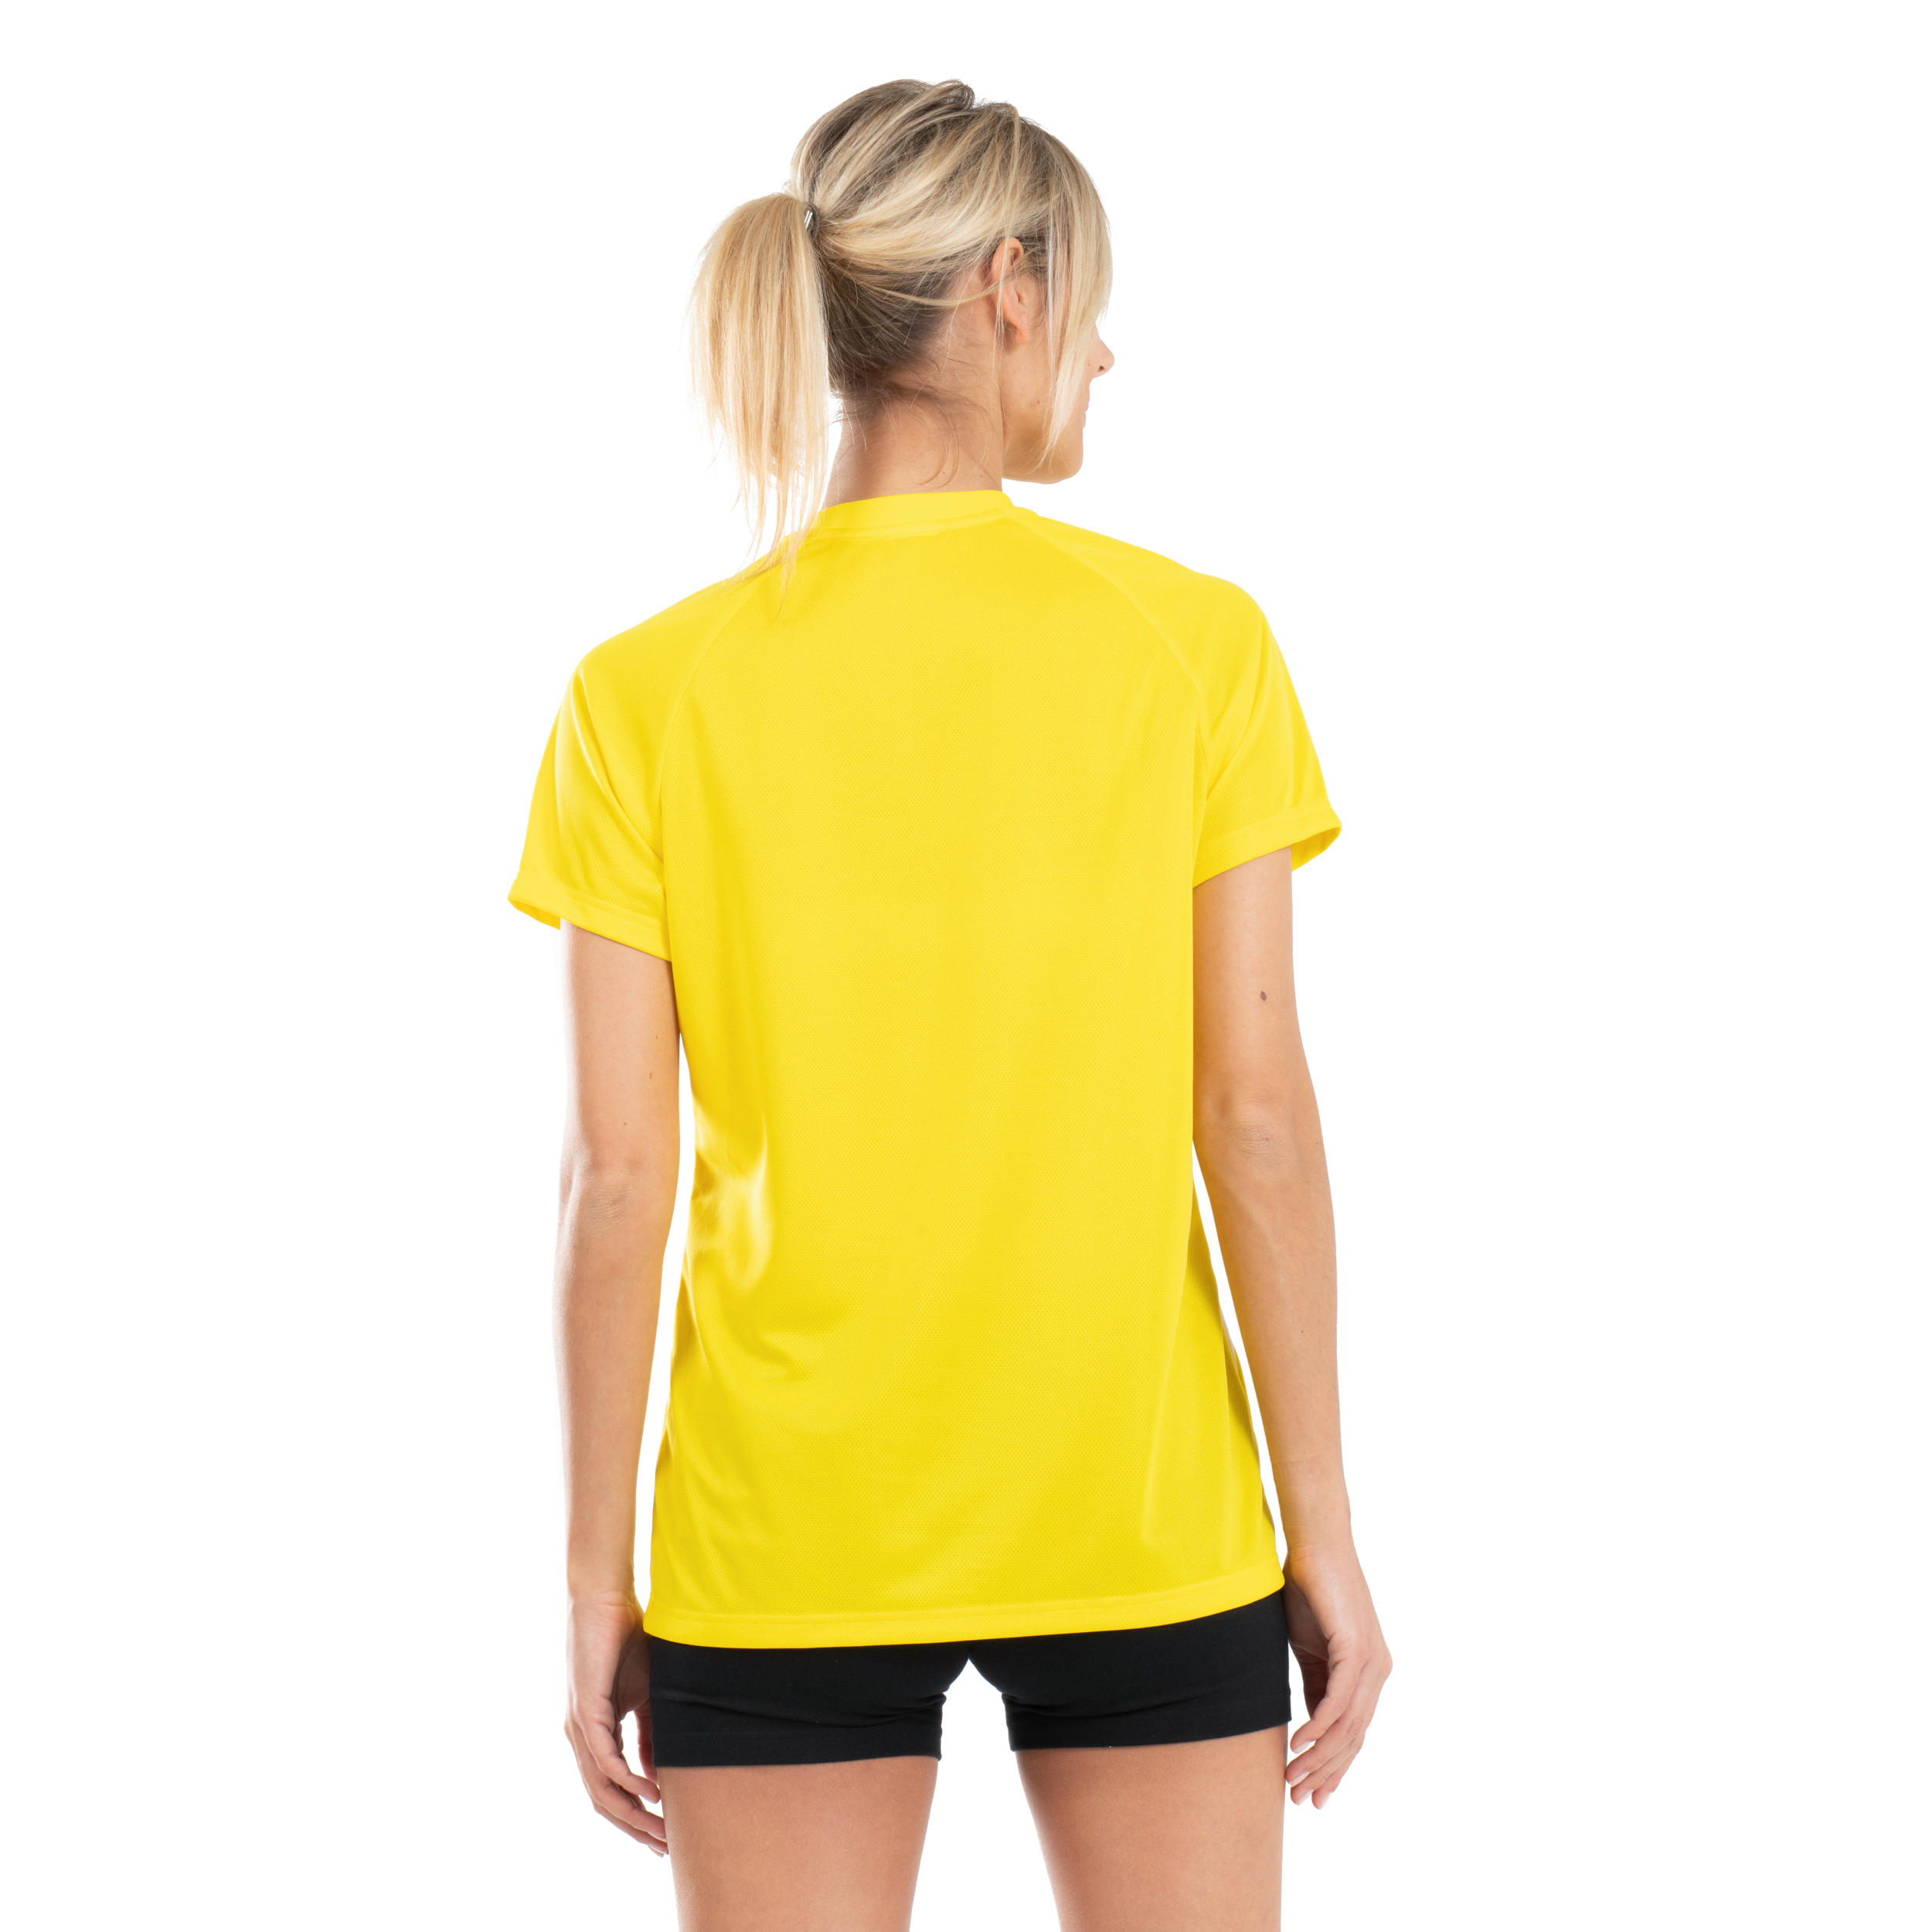 V100 Women's Volleyball Jersey - Yellow 5/8